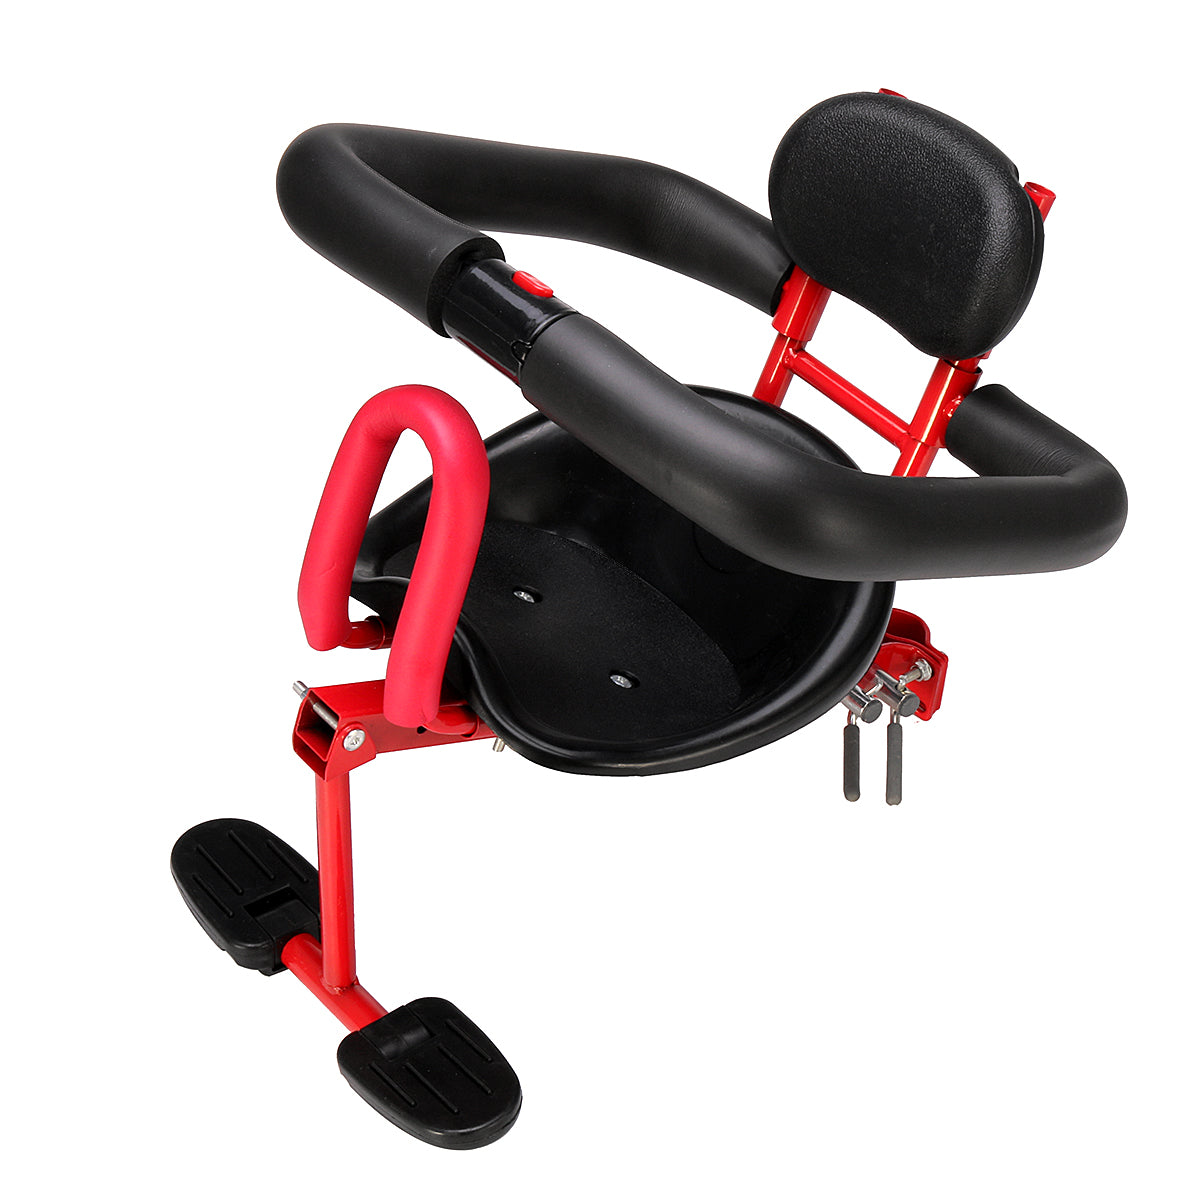 BIKIGHT Bike Kids Rack Mount Seat Protection Safety Quick Release Lock Cycling Children Front Saddle Chair Bike Accessories